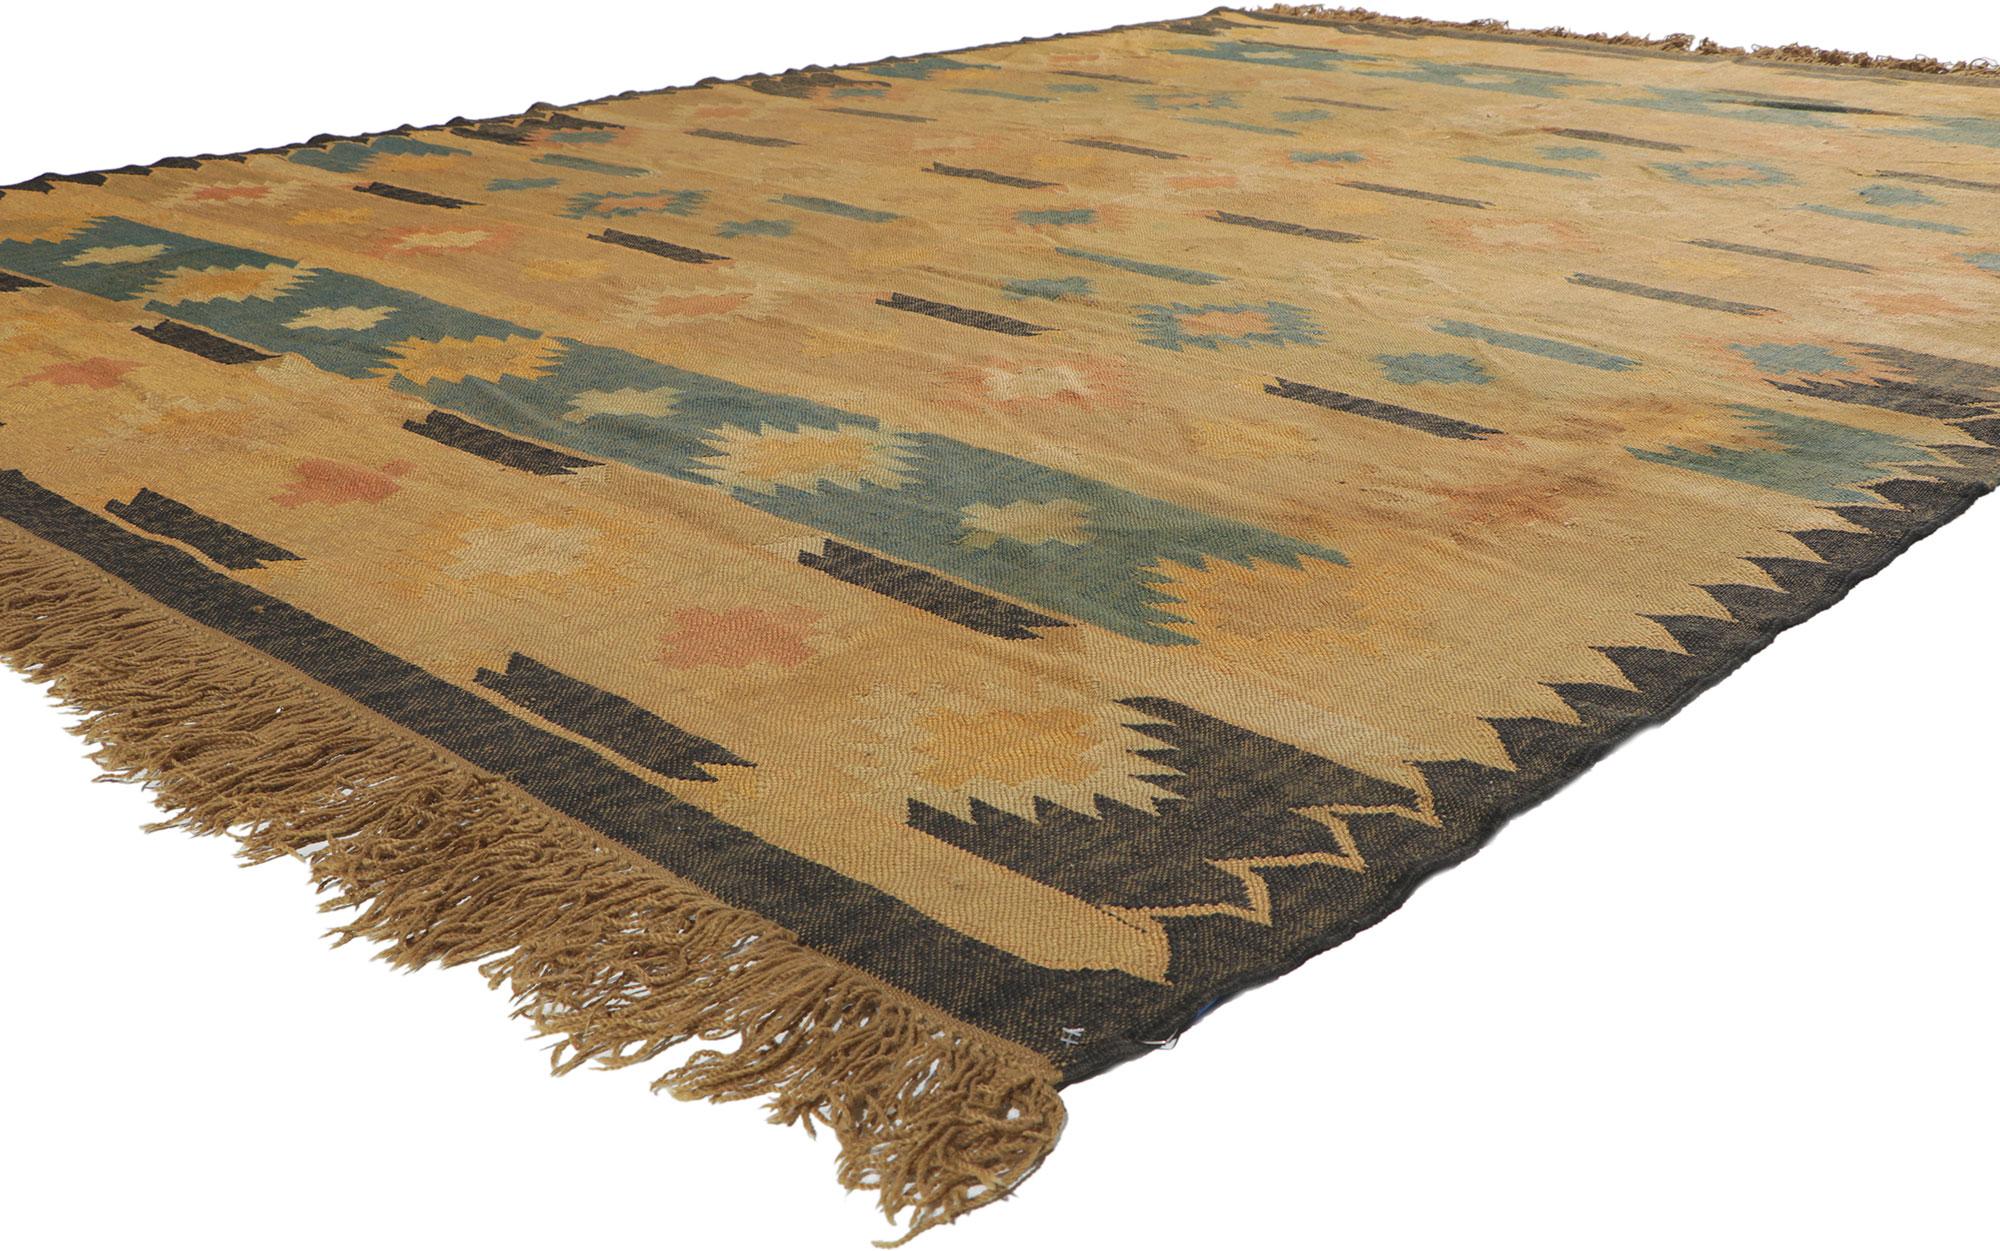 78207 Vintage Indian Kilim Rug, 08'10 x 12'03.
Boho Tribal Meets Southwest Chic​ in this handwoven vintage Indian kilim rug. The southwestern design and rustic earthy colorway woven into this piece work together creating subtle graphic appeal while